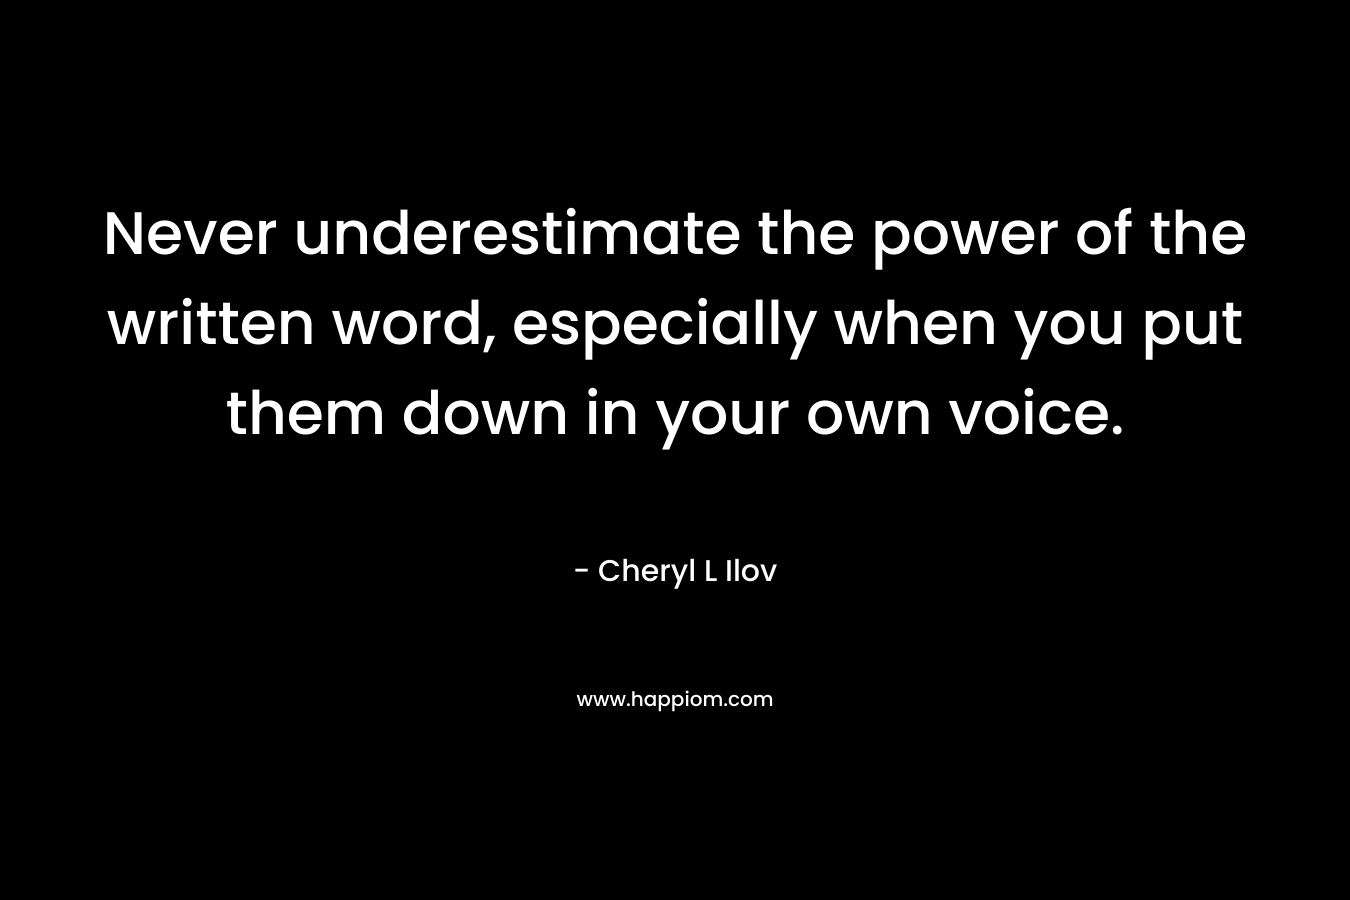 Never underestimate the power of the written word, especially when you put them down in your own voice.